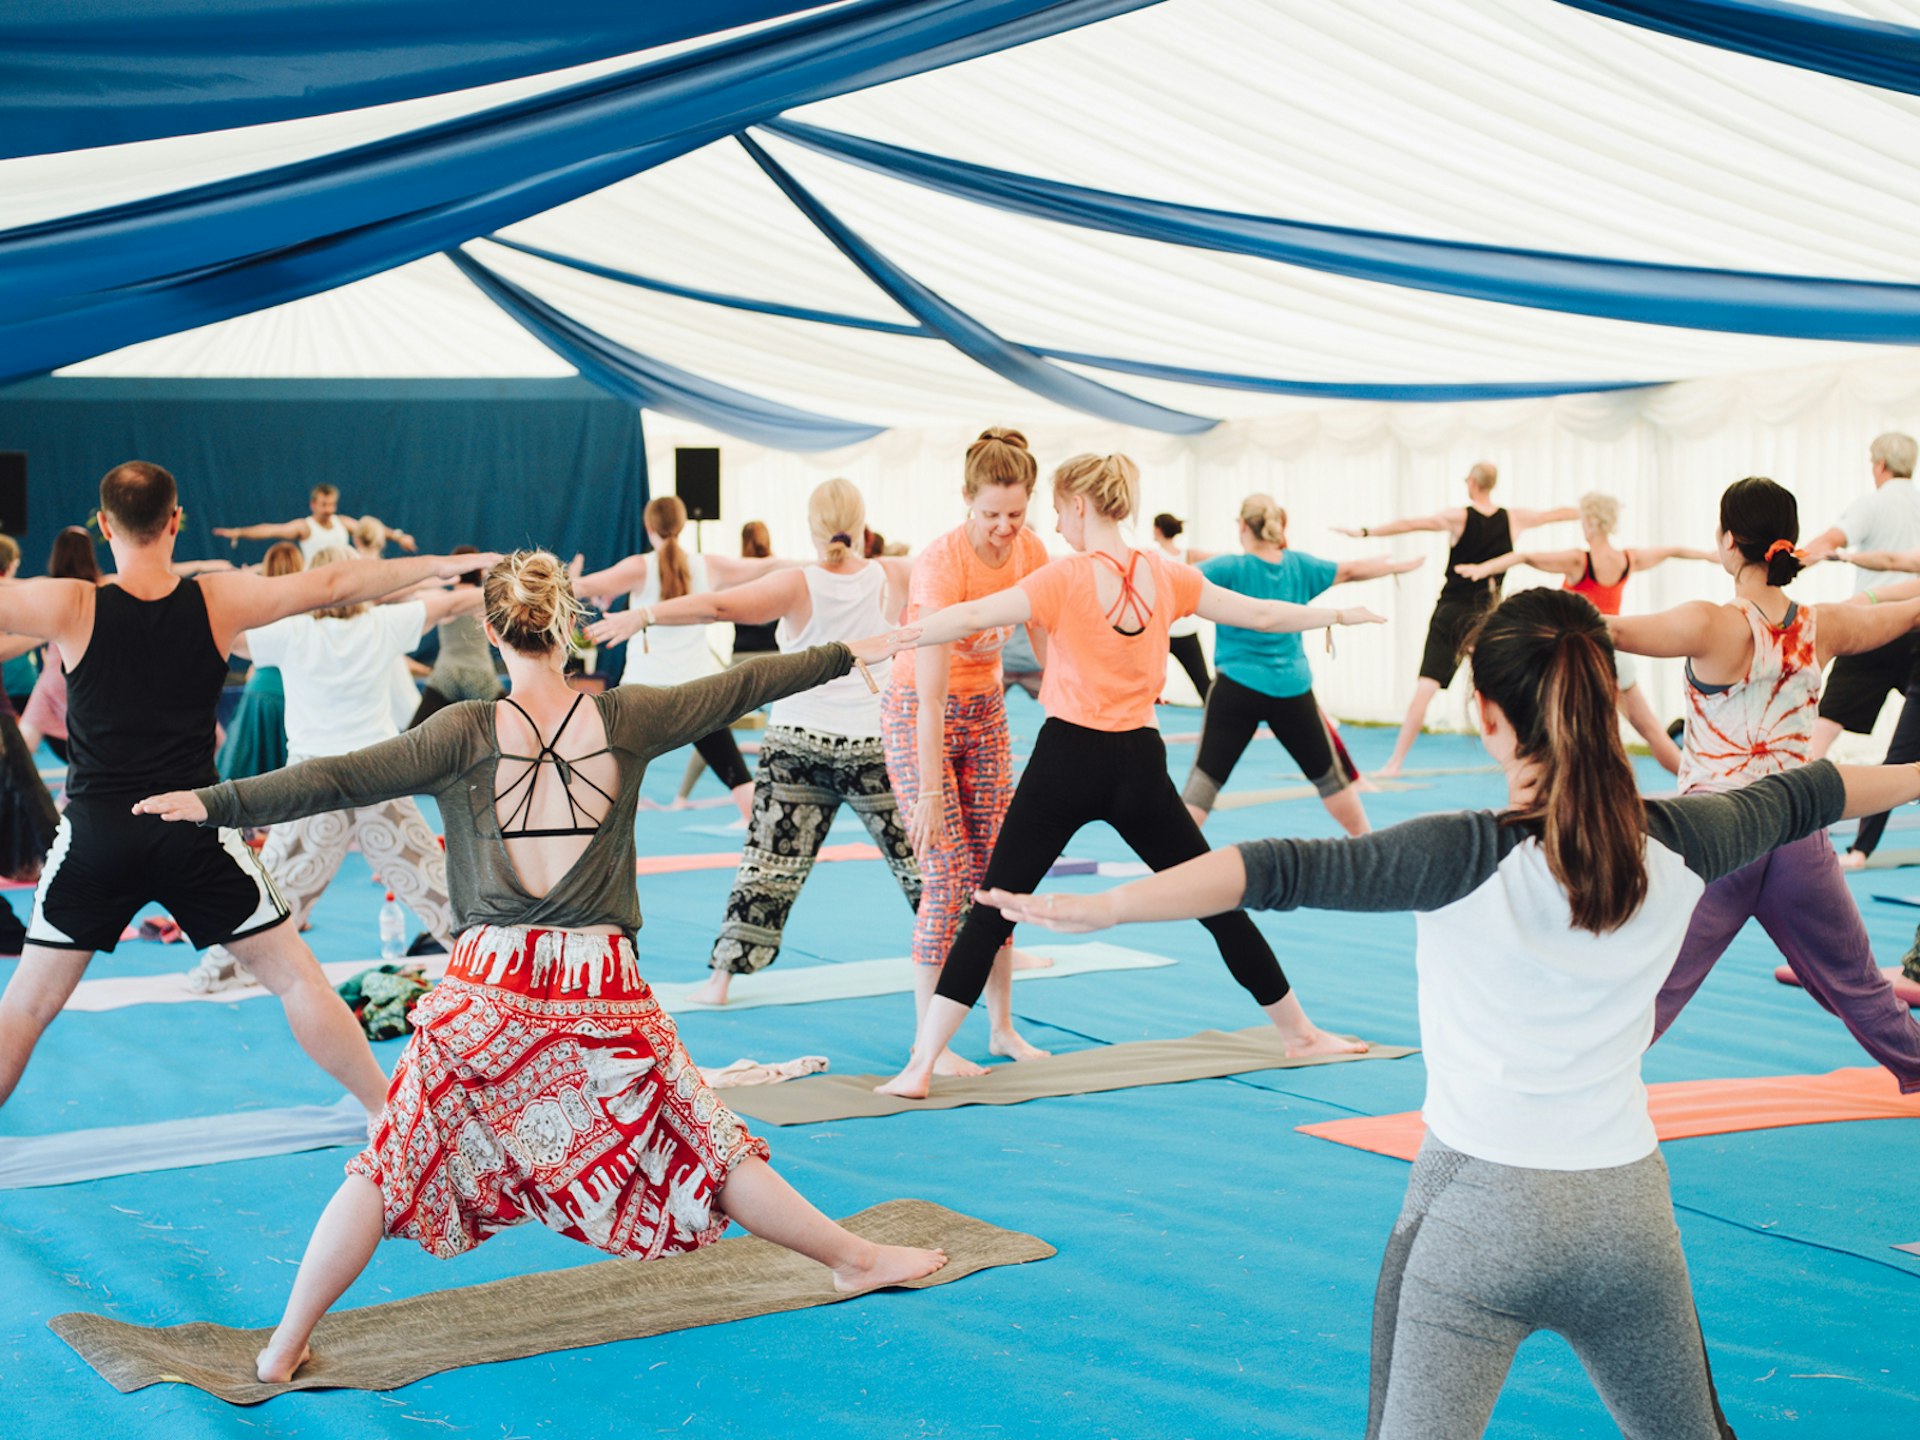 Alternative festivals - Lots of participants enjoying a yoga class inside a large tent with a white and blue draped material roof. The floor is blue and the yogis are about to enter the triangle pose. An instructor is making corrections to one person's posture.